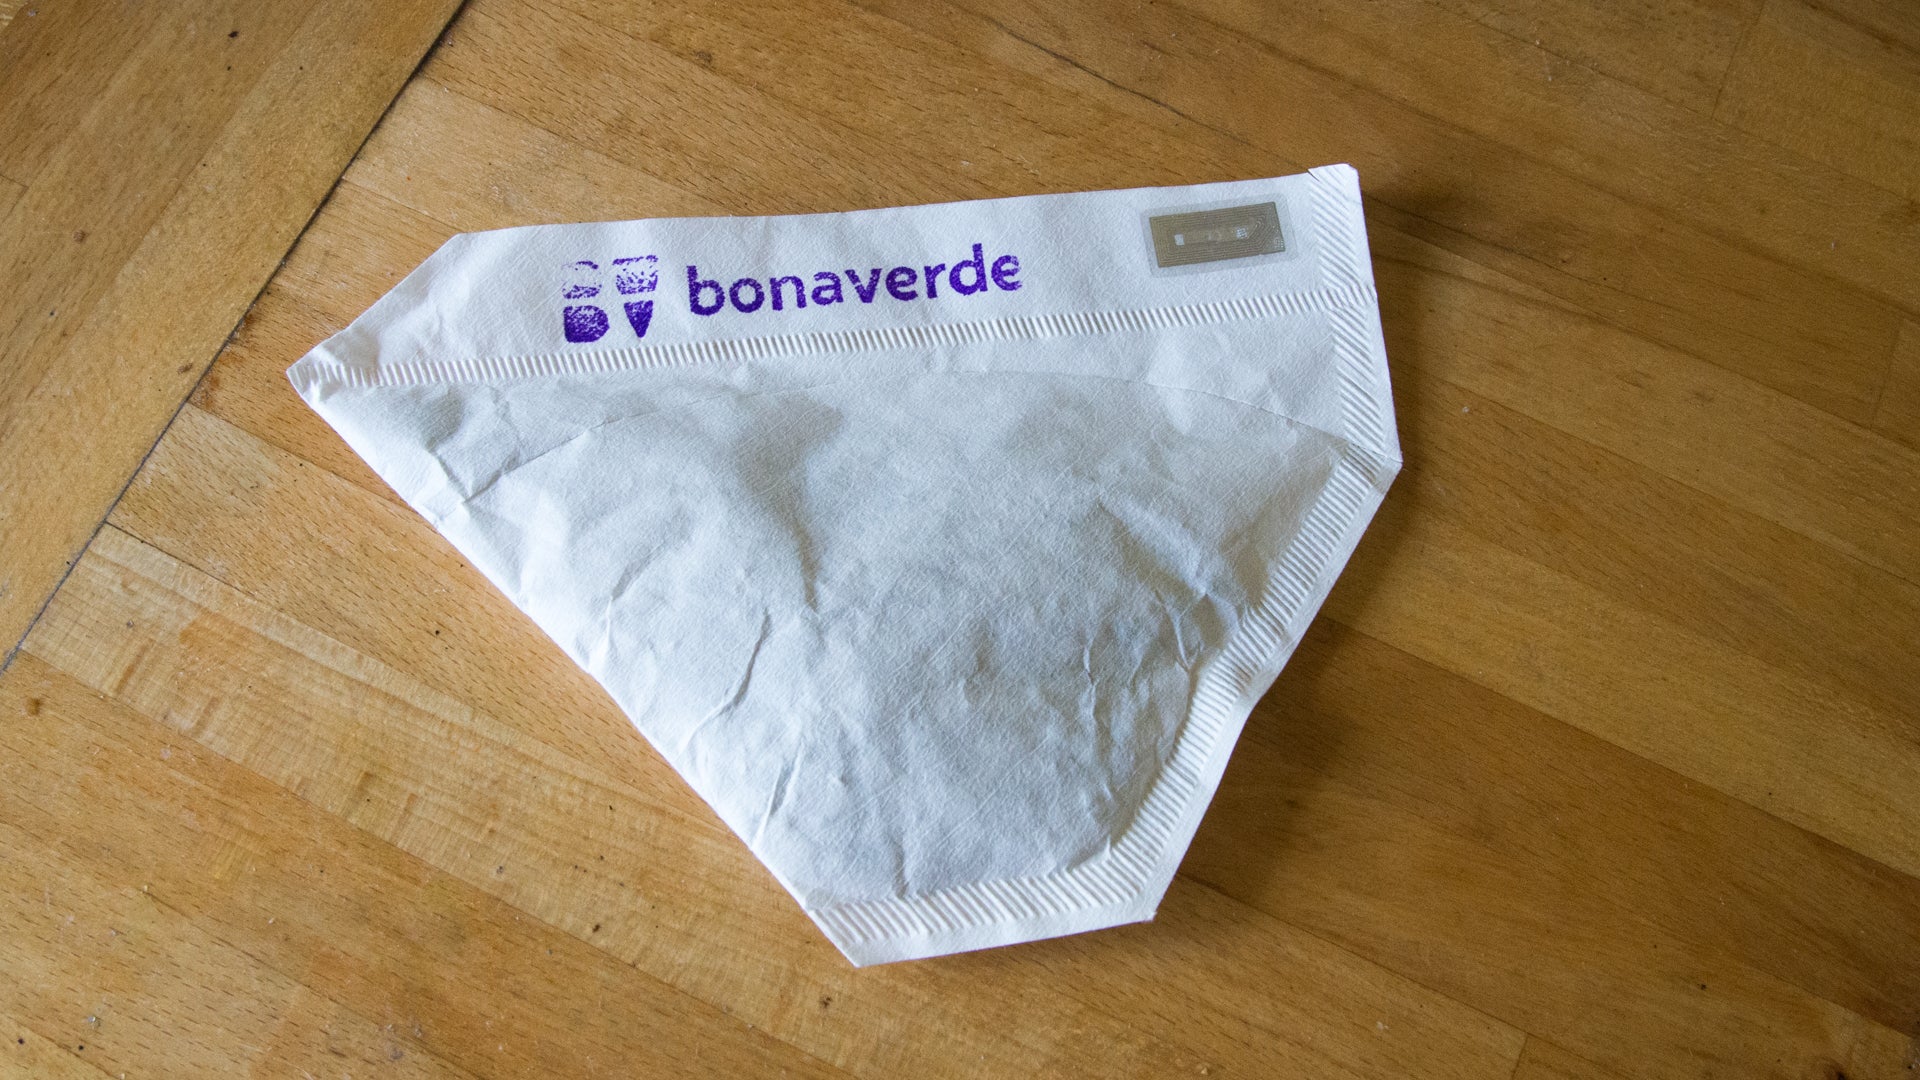 Bonaverde coffee machine filter pouch on wooden surface.